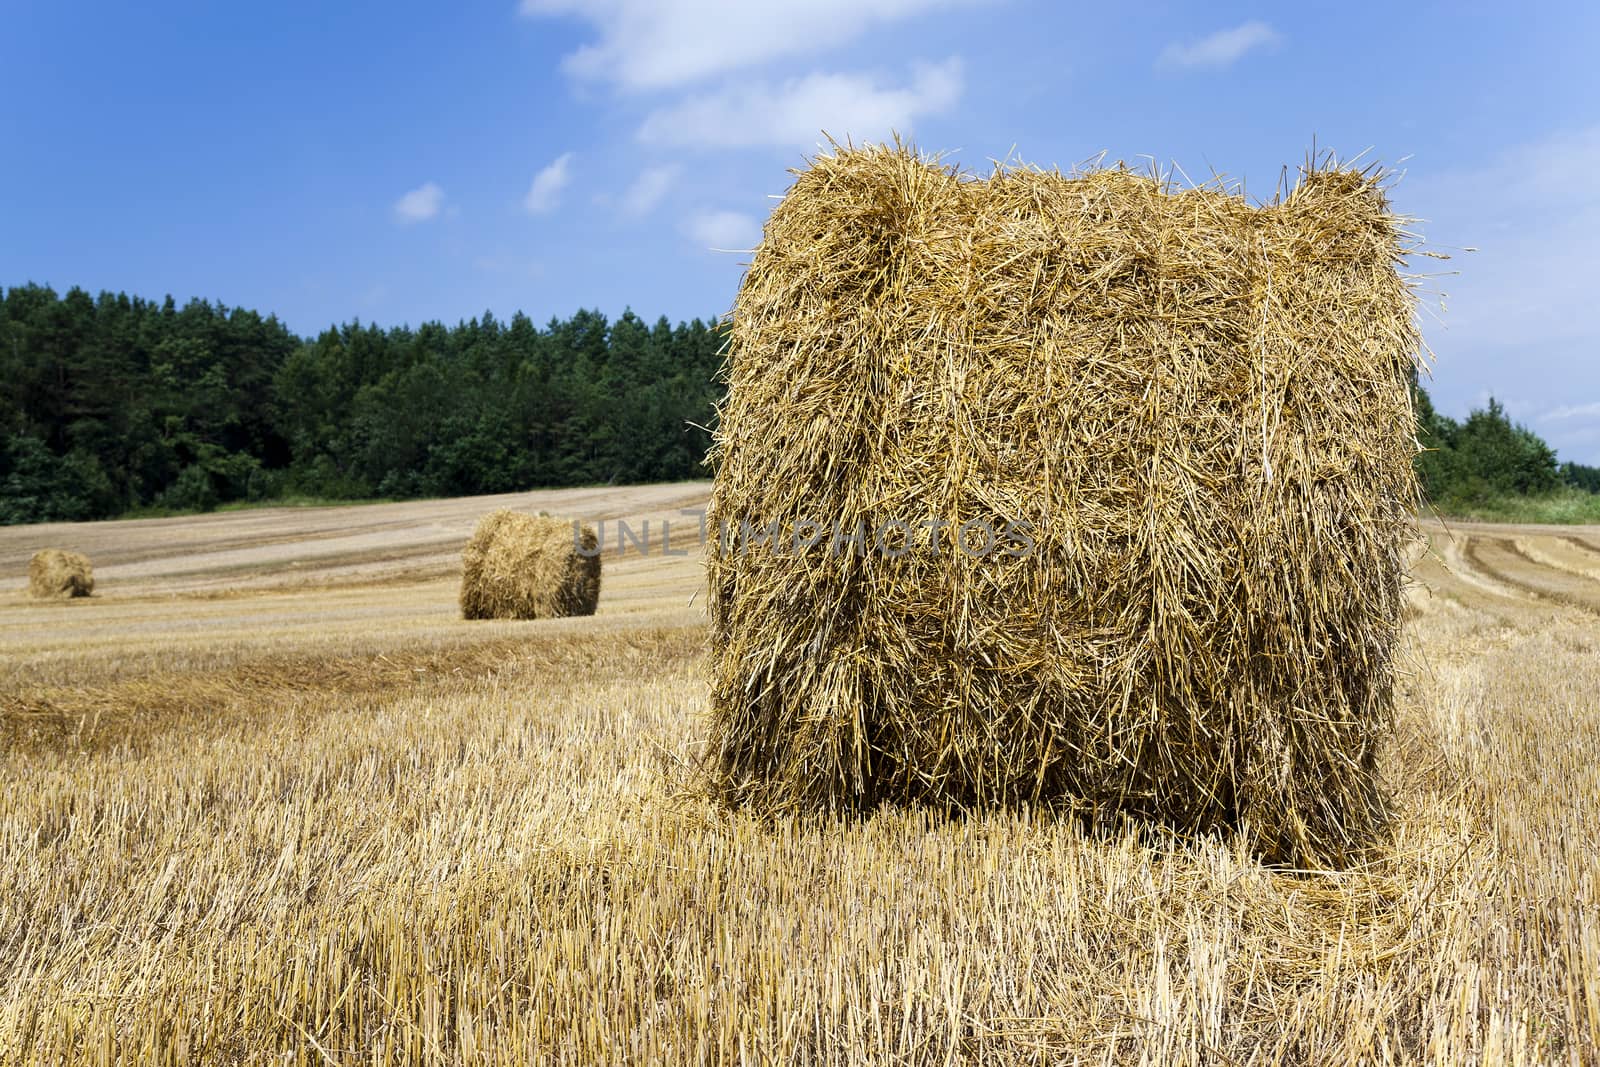   piled in the agricultural field haystacks straw. cereals. summer